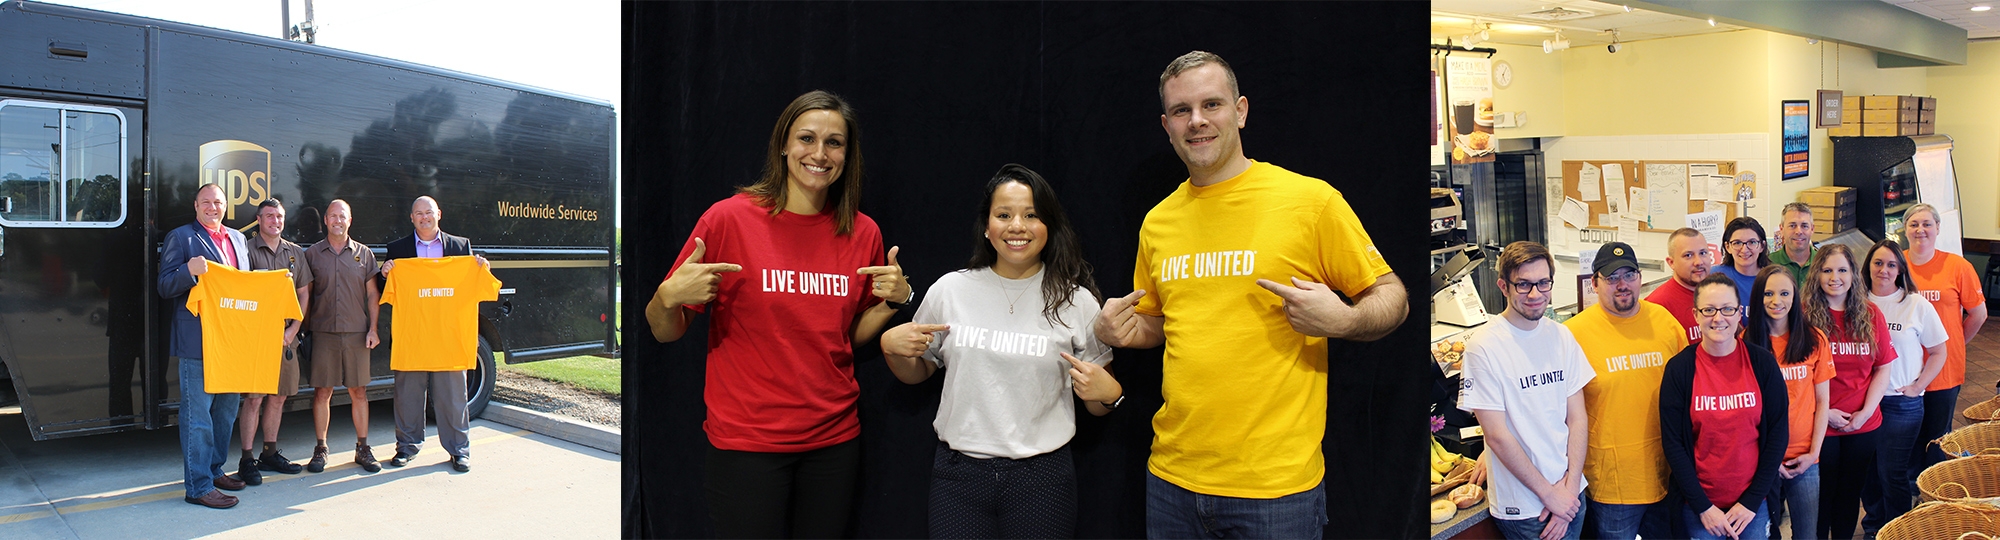 Collage of people wearing Live United tee shirts